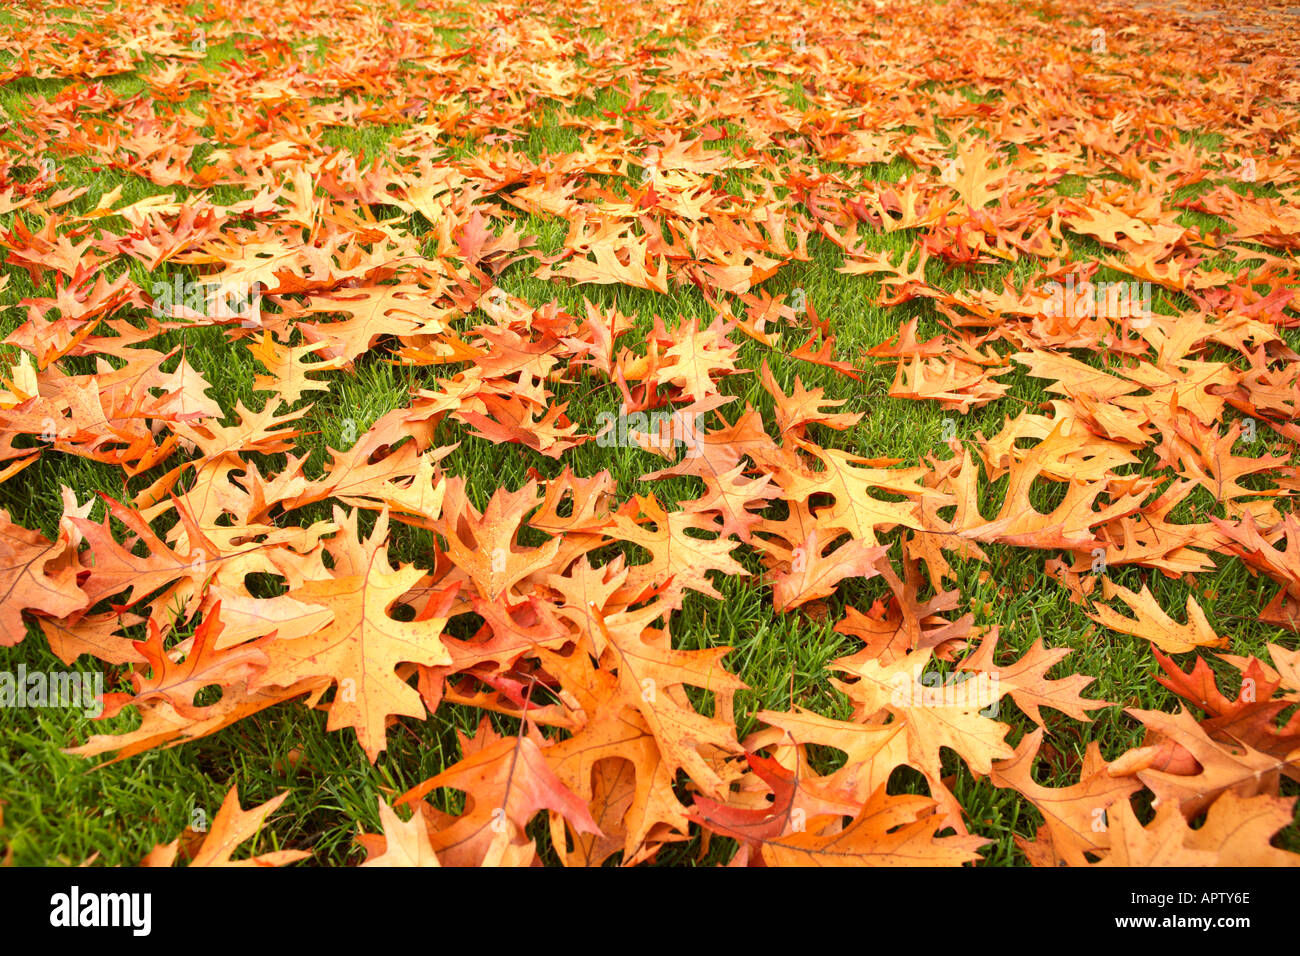 Fall Leaves on Grass Stock Photo